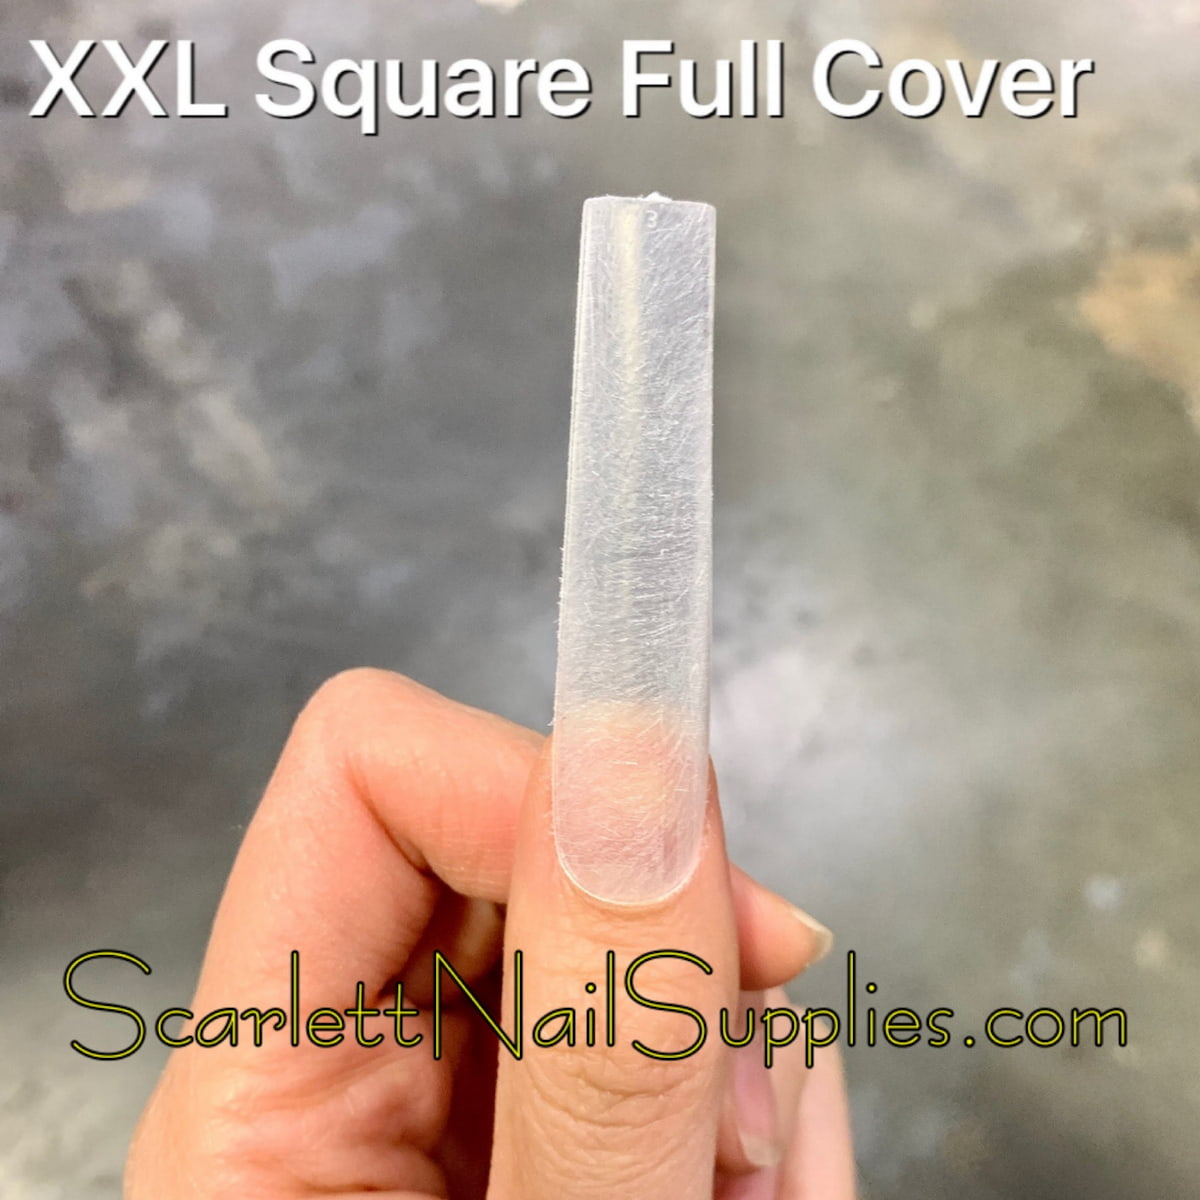 Tapered Square Nail Tips are full cover and new designed. They are useful for nail tech and easy to apply on natural nails for designs with gel polish or acrylic powder.